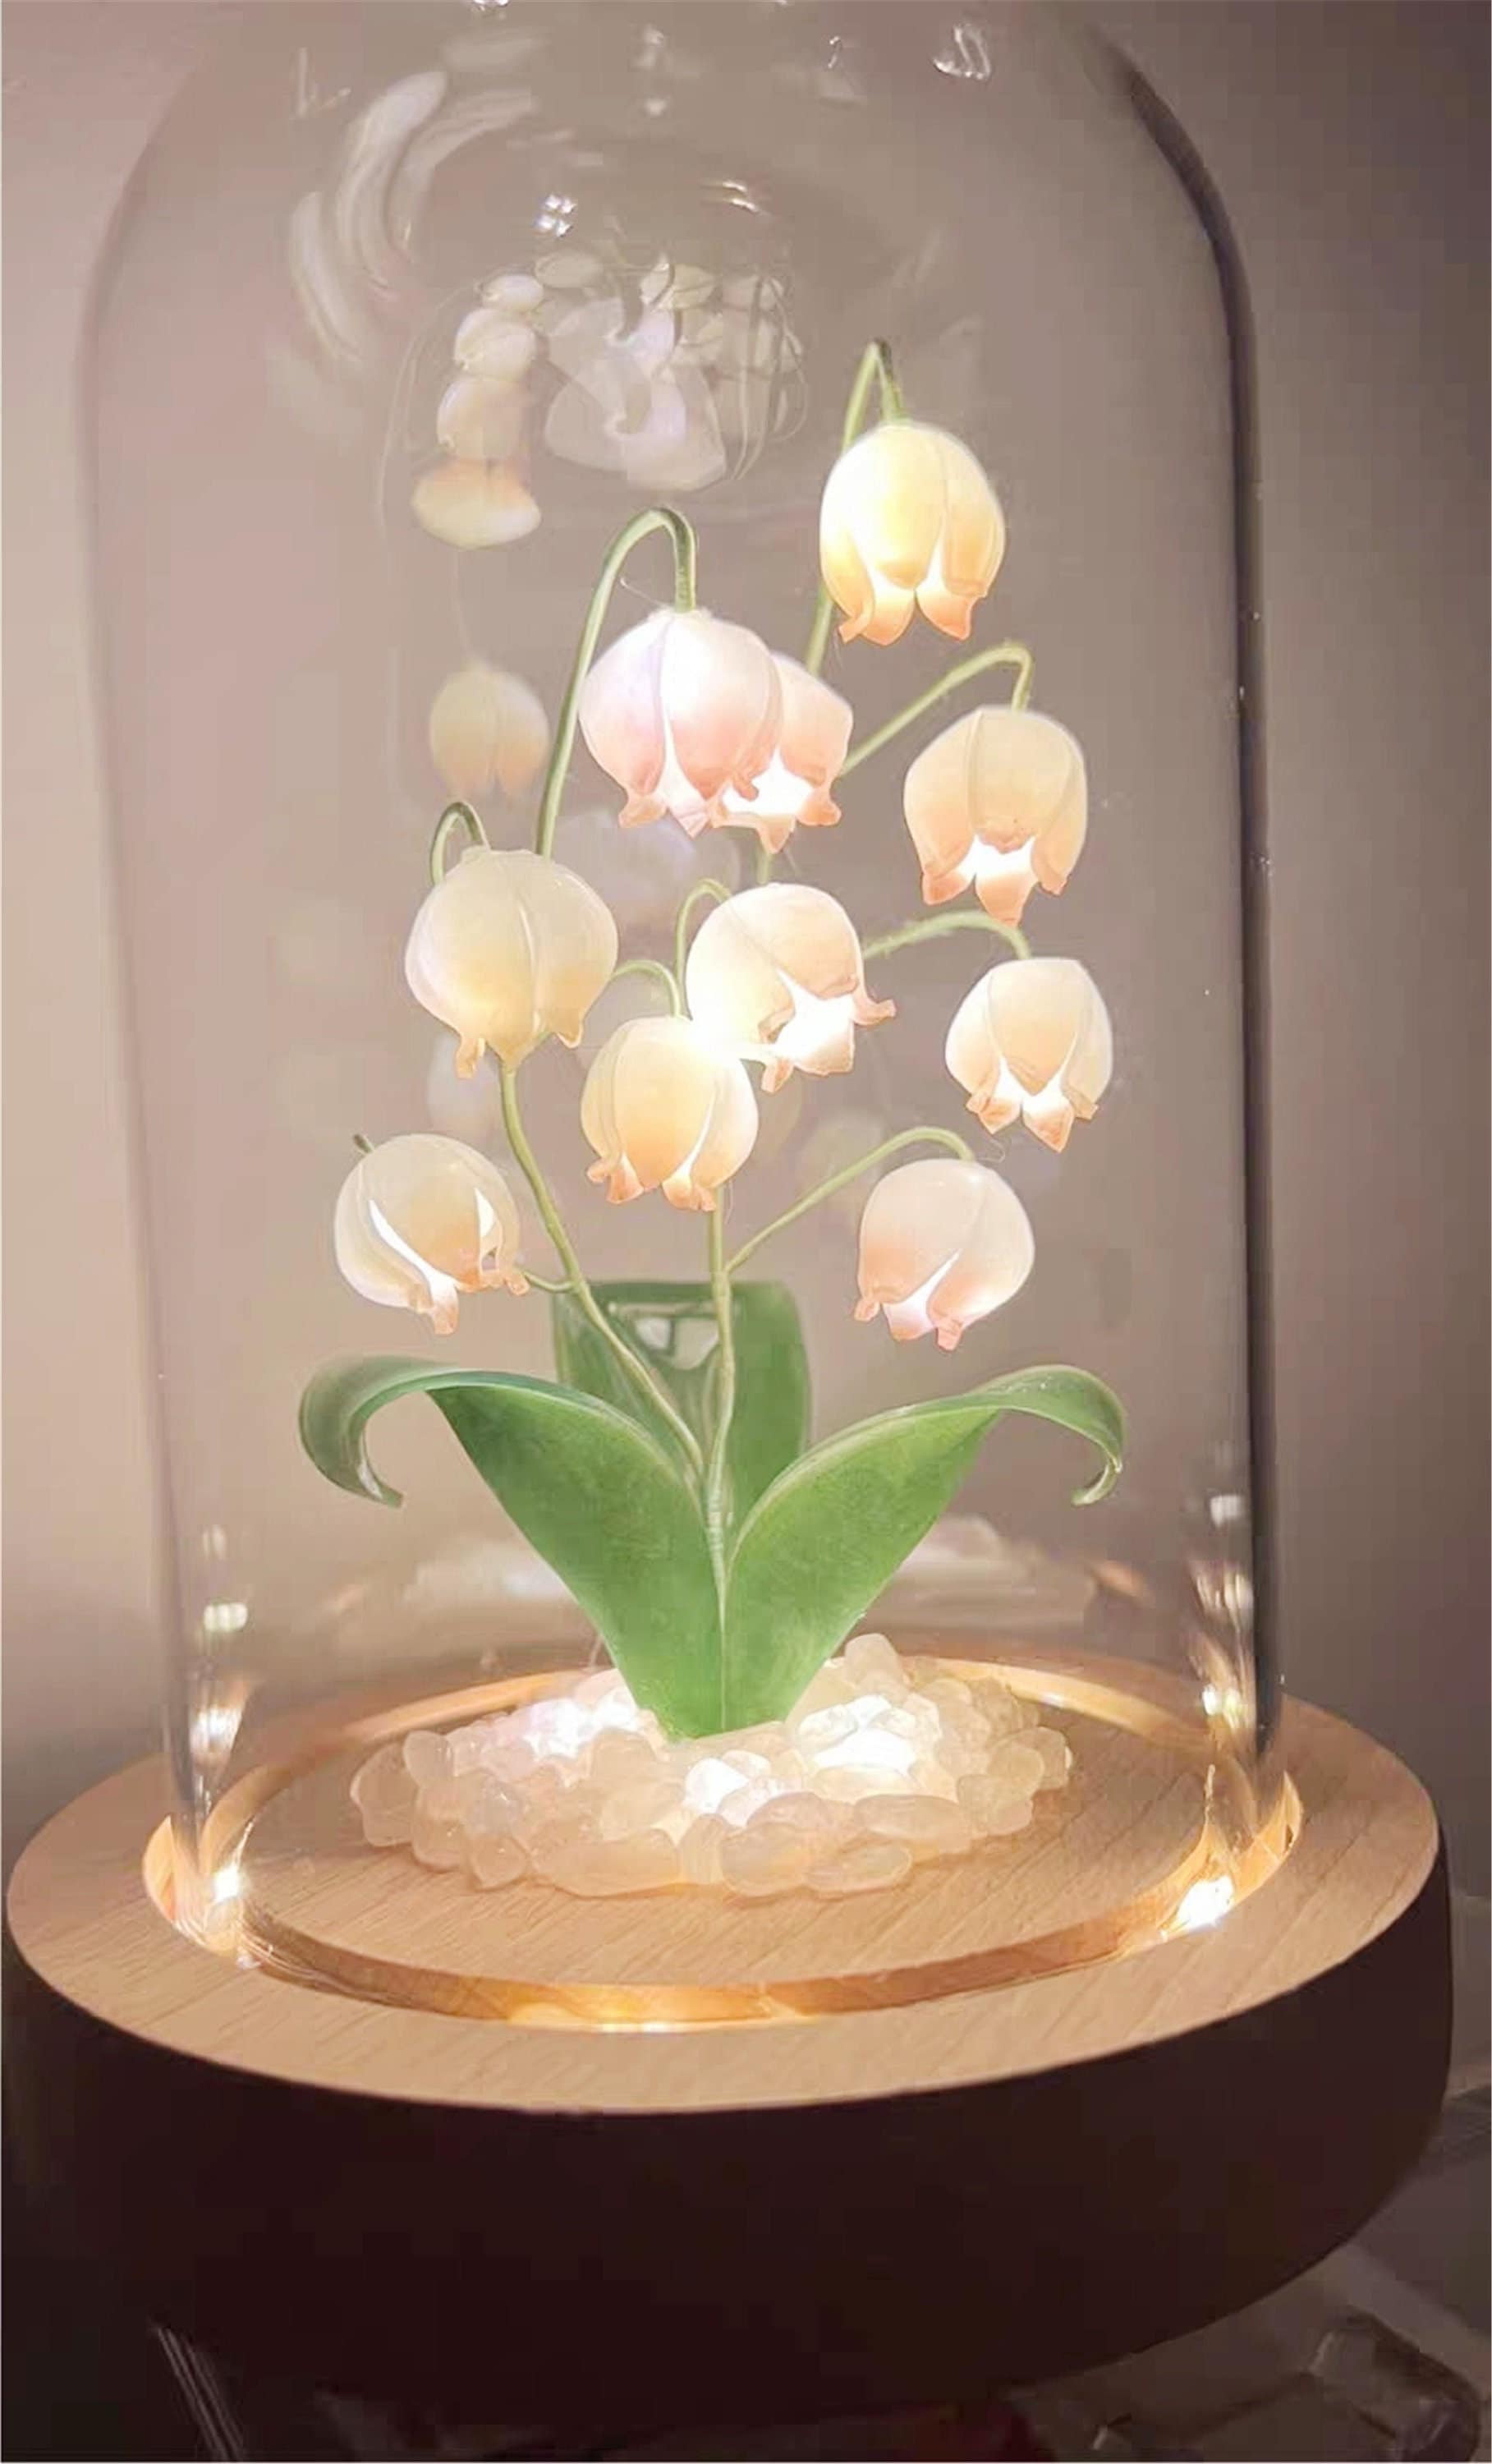 Lily of Valley Lamp, 10pcs Crochet Artificial Flowers with Night Lights  Fake Lily of Valley Included Pots - for Gift, Birthday, Ideas for  Valentine's